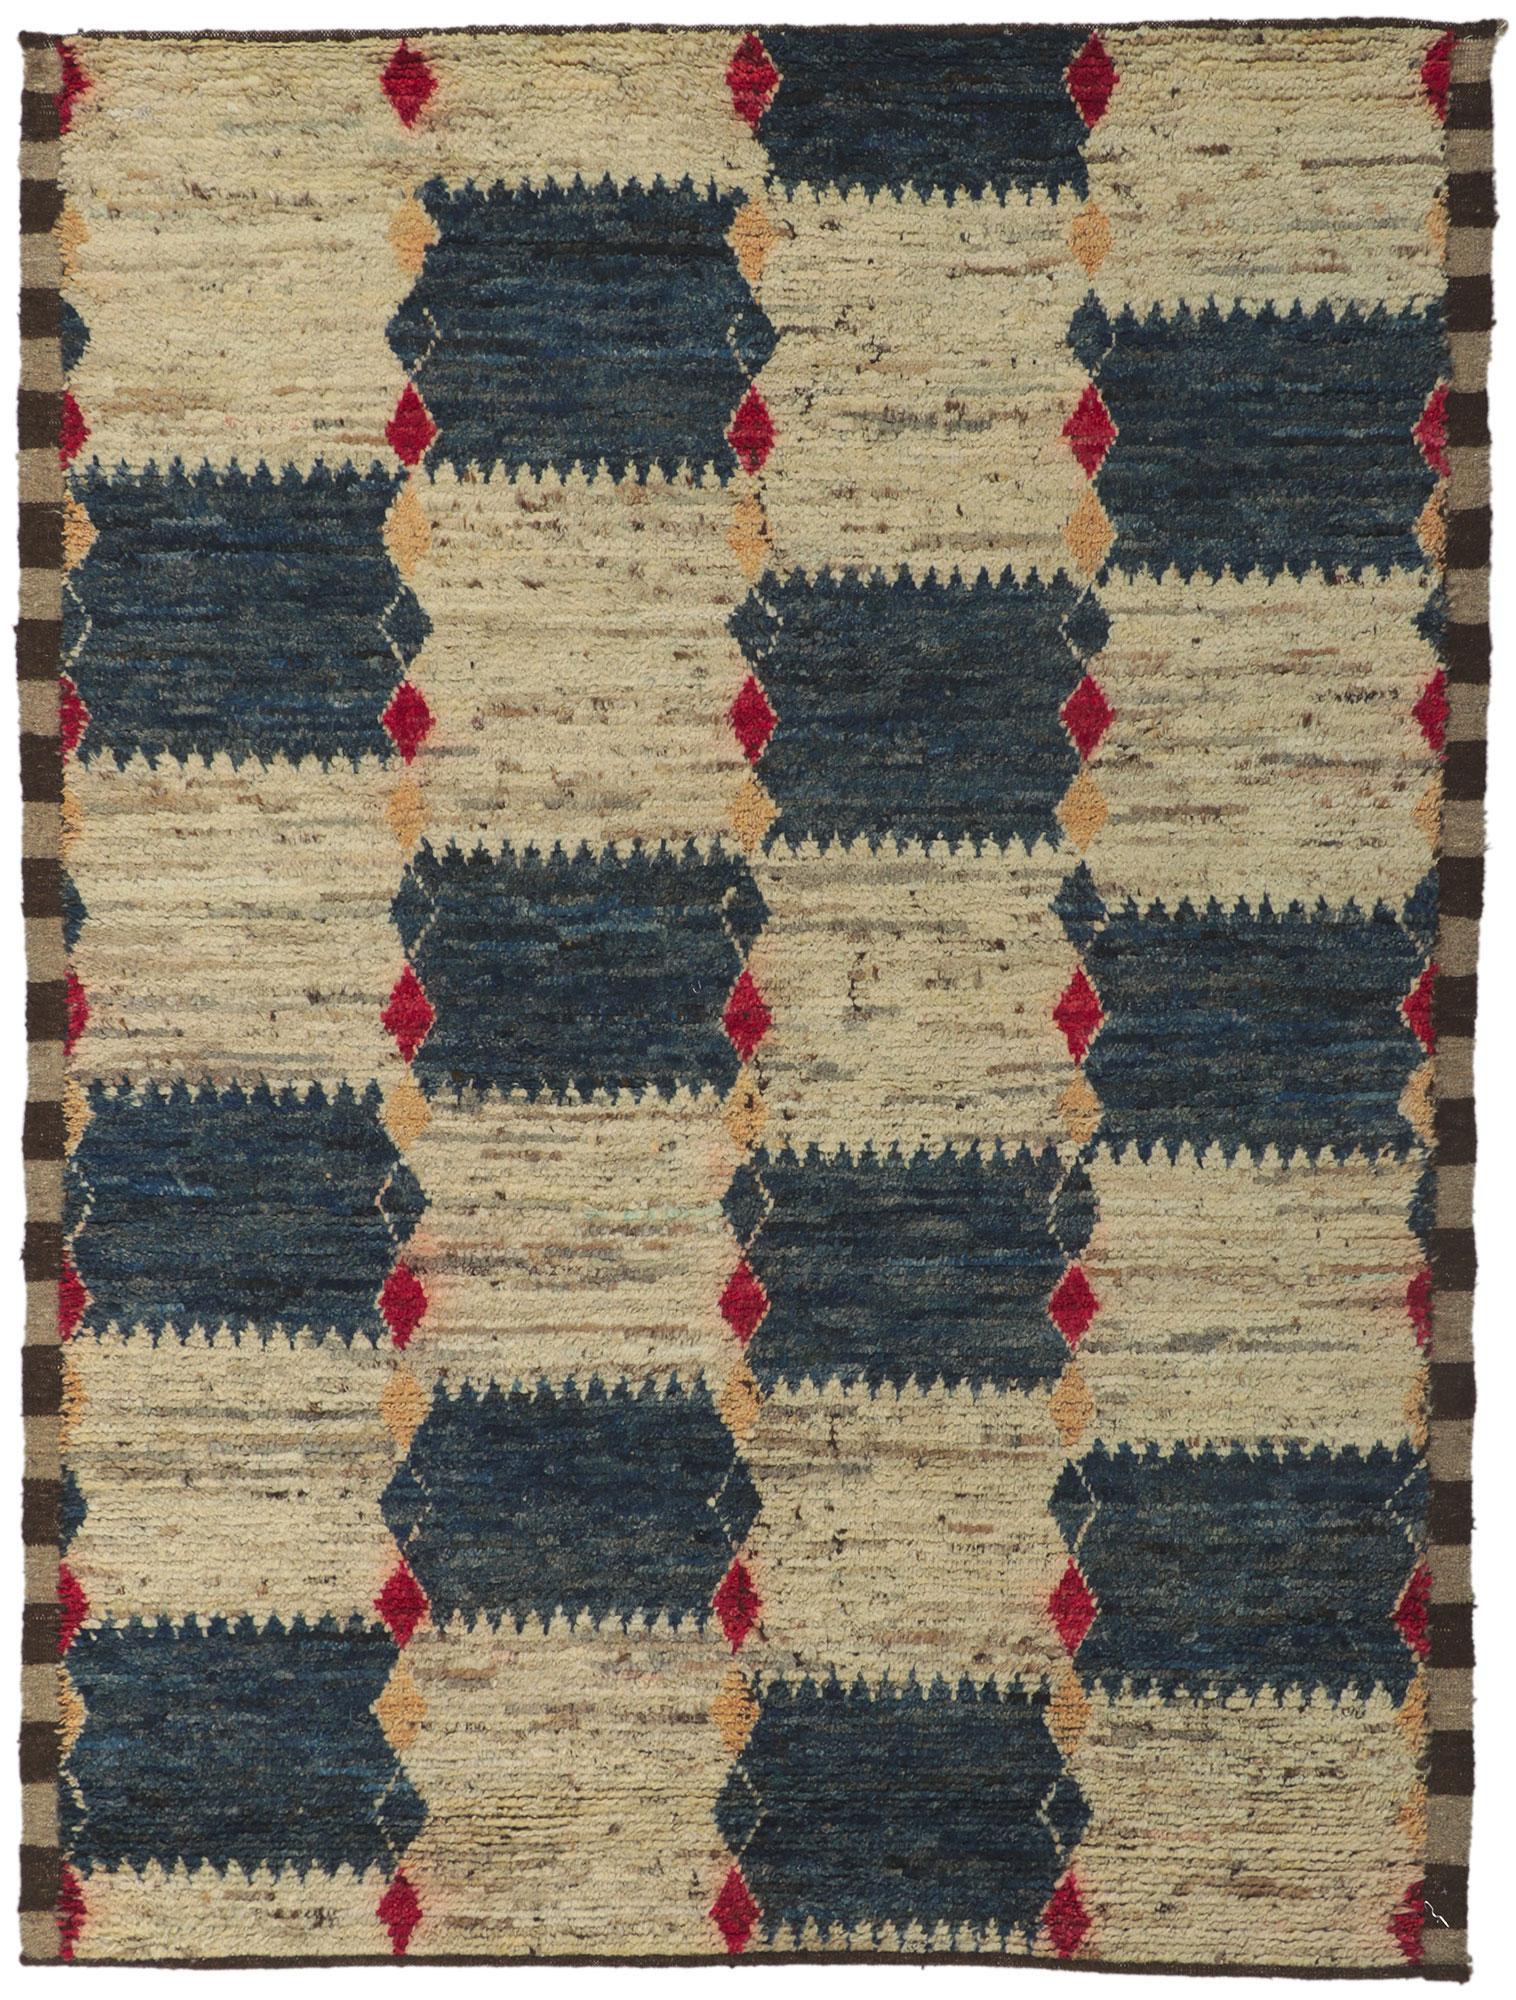 Earth-tone Checkered Moroccan Rug, Midcentury Modern Meets Tribal Enchantment For Sale 2